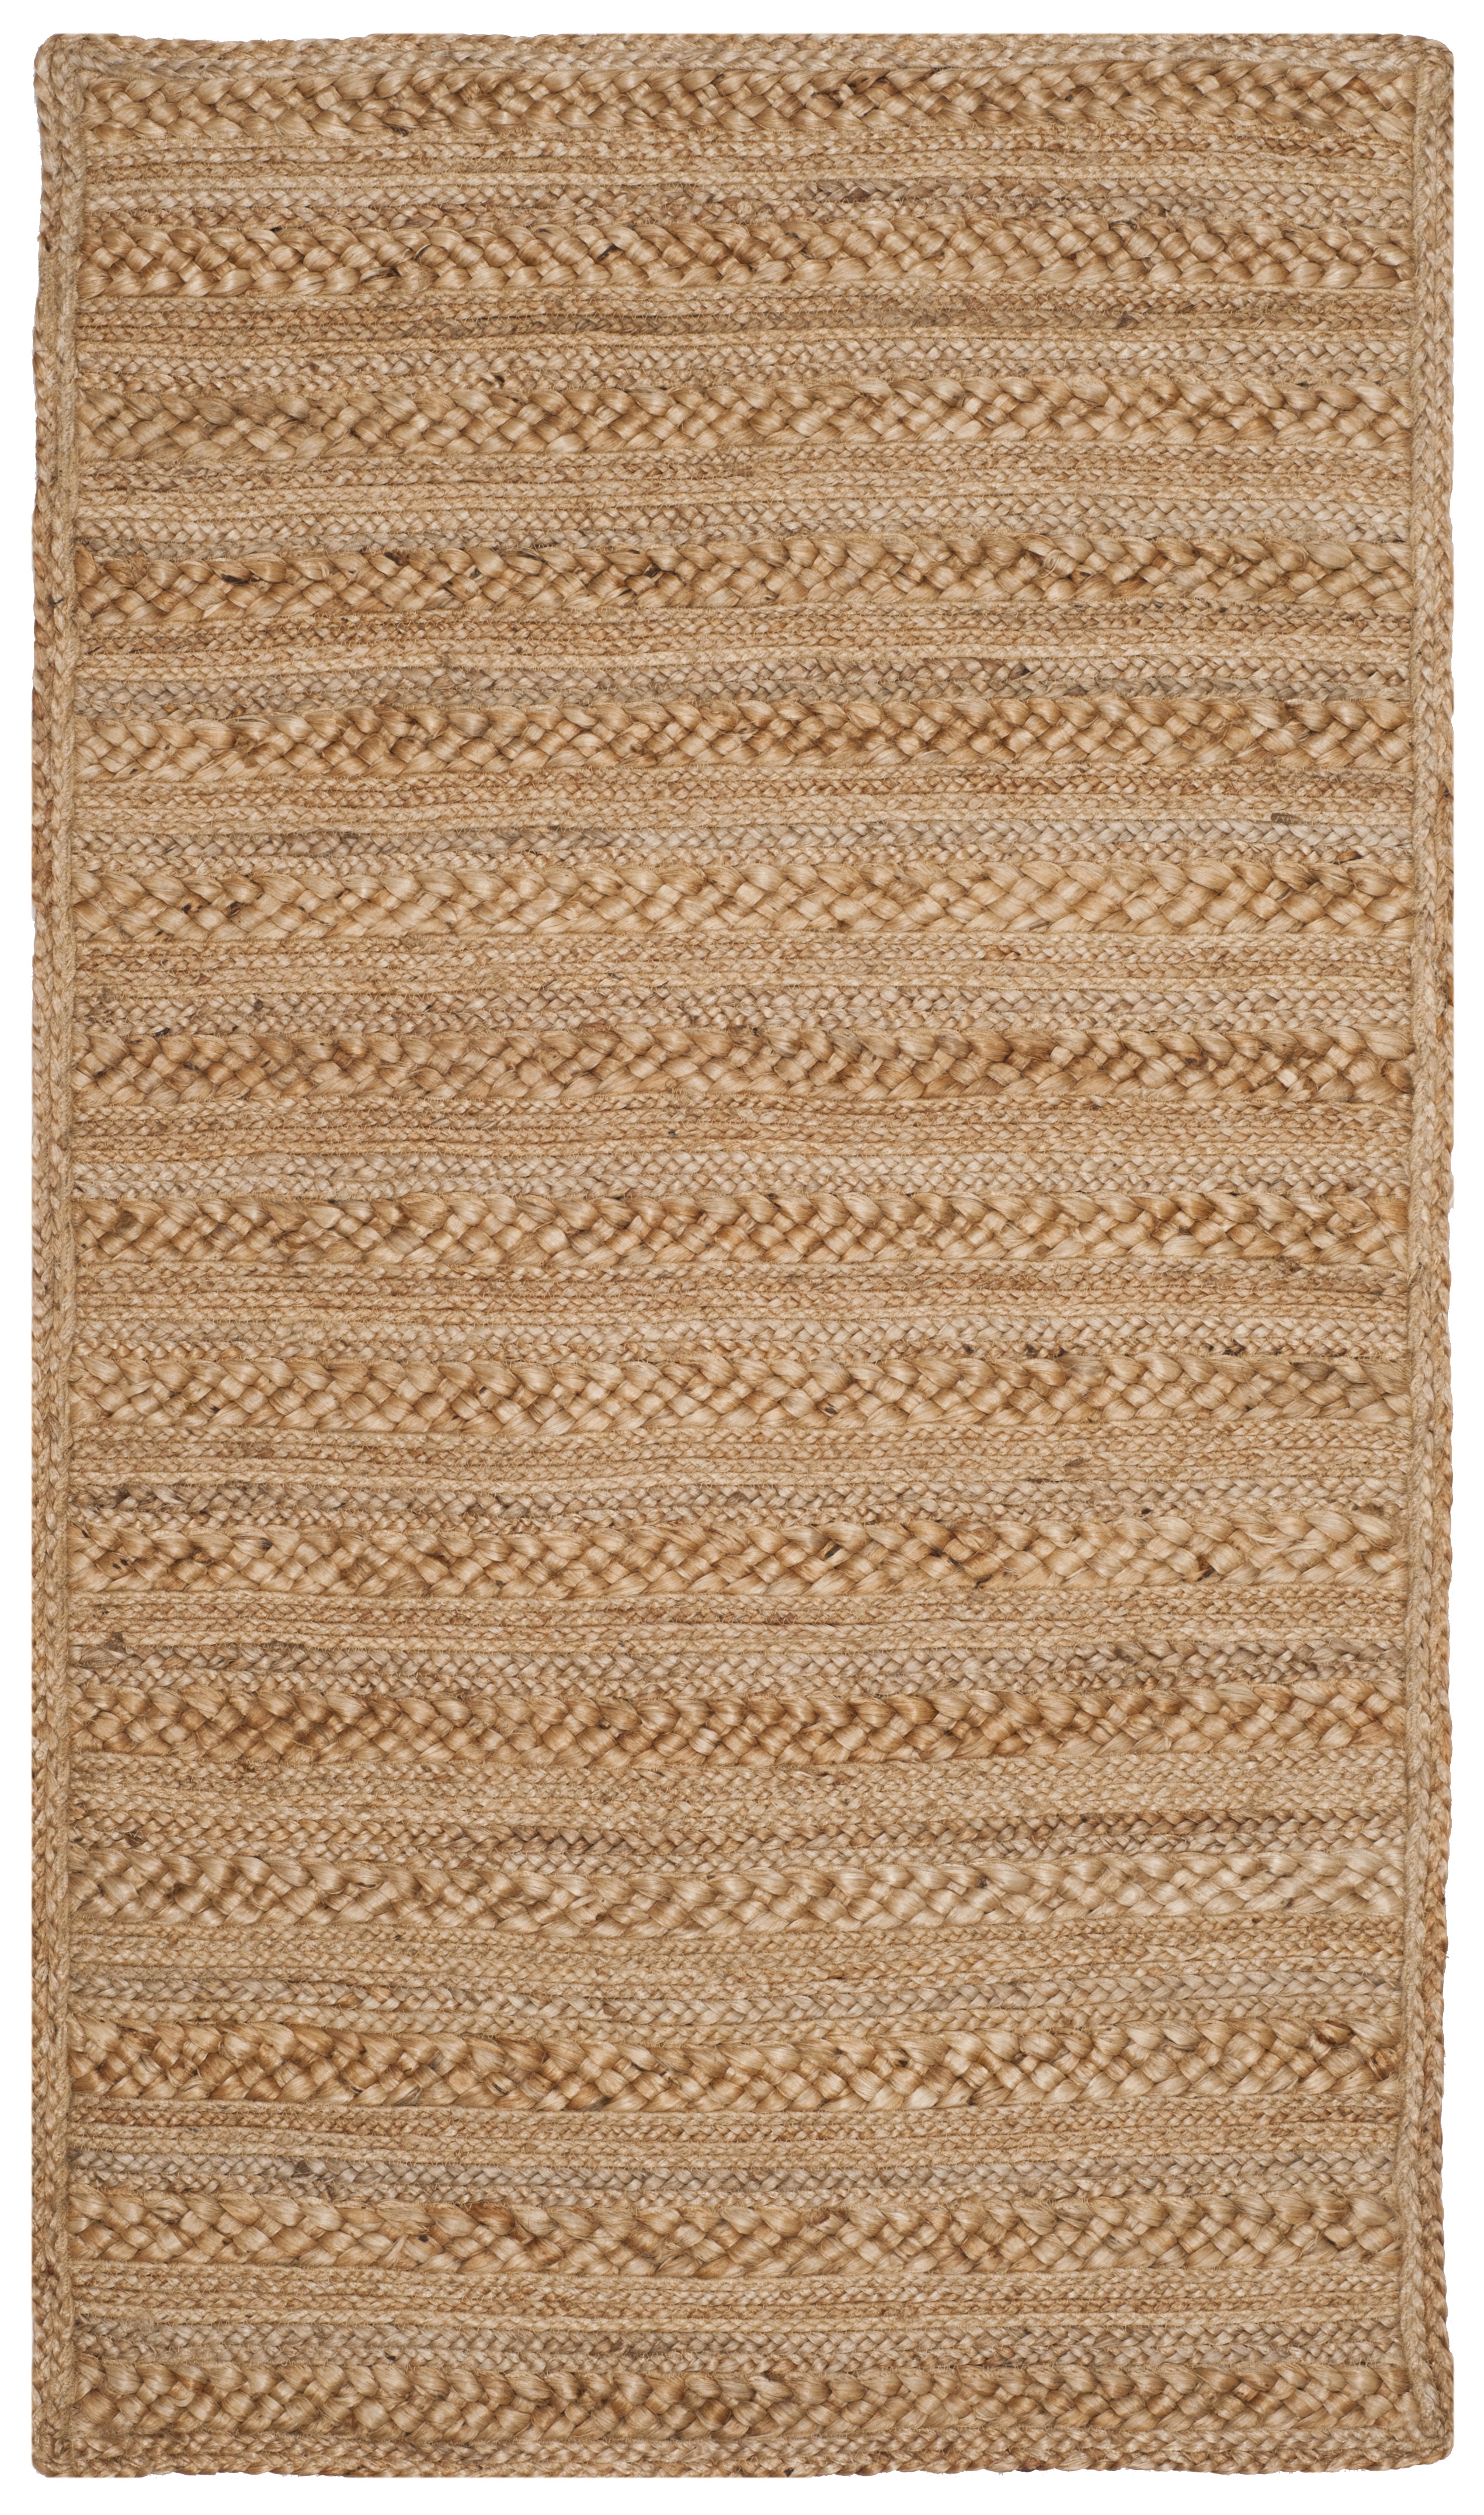 Arlo Home Hand Woven Area Rug, NF871A, Natural,  3' X 5' - Image 0